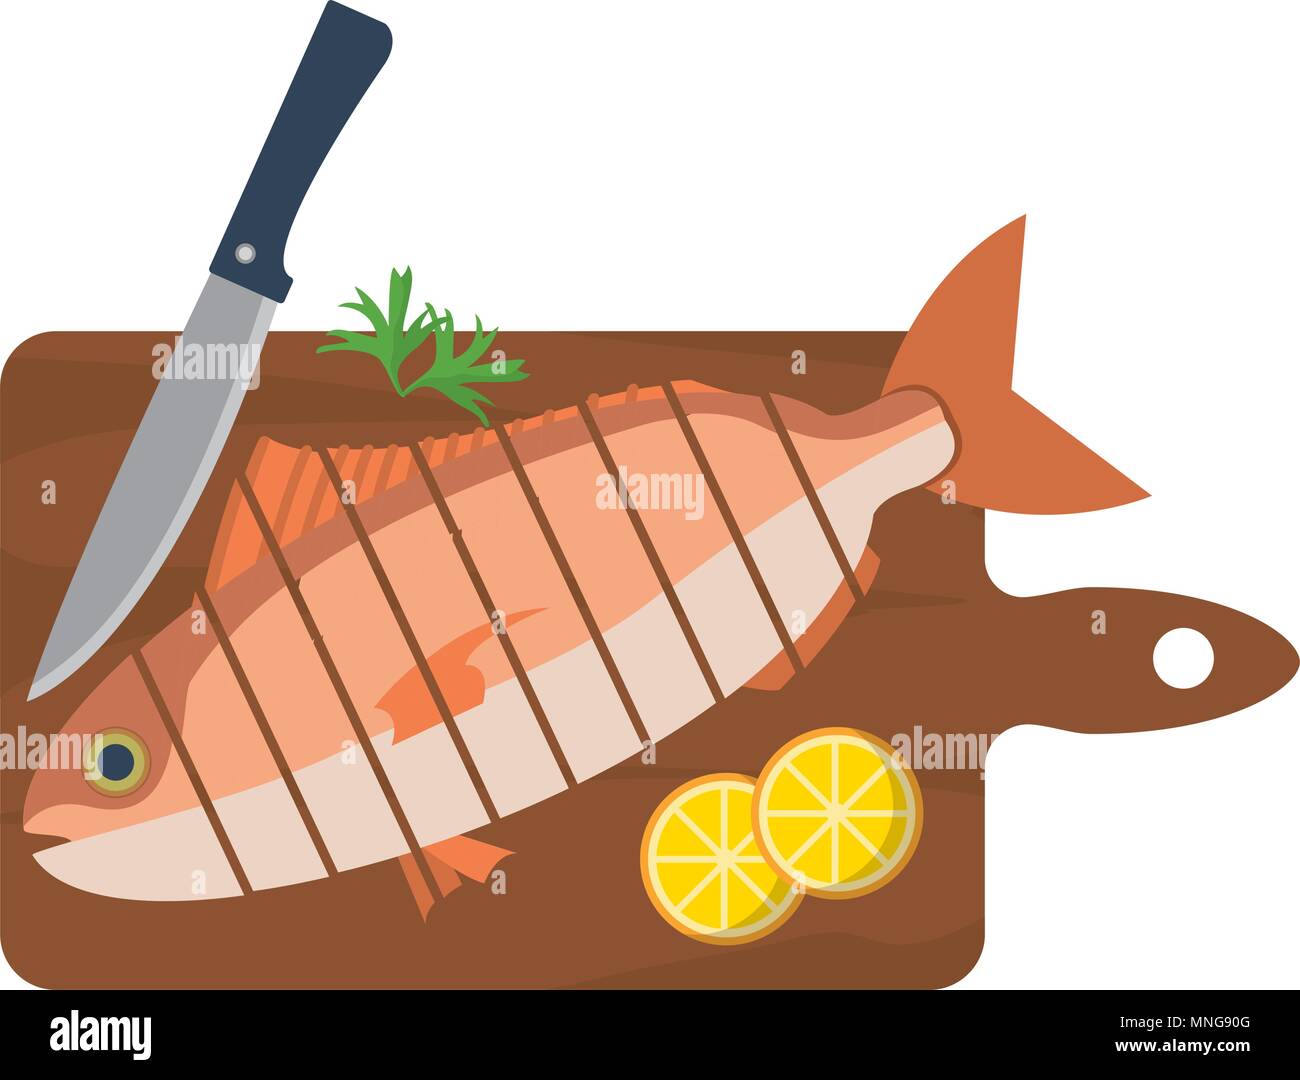 https://c8.alamy.com/comp/MNG90G/chopped-fish-with-lemon-and-knife-in-the-cutting-board-MNG90G.jpg